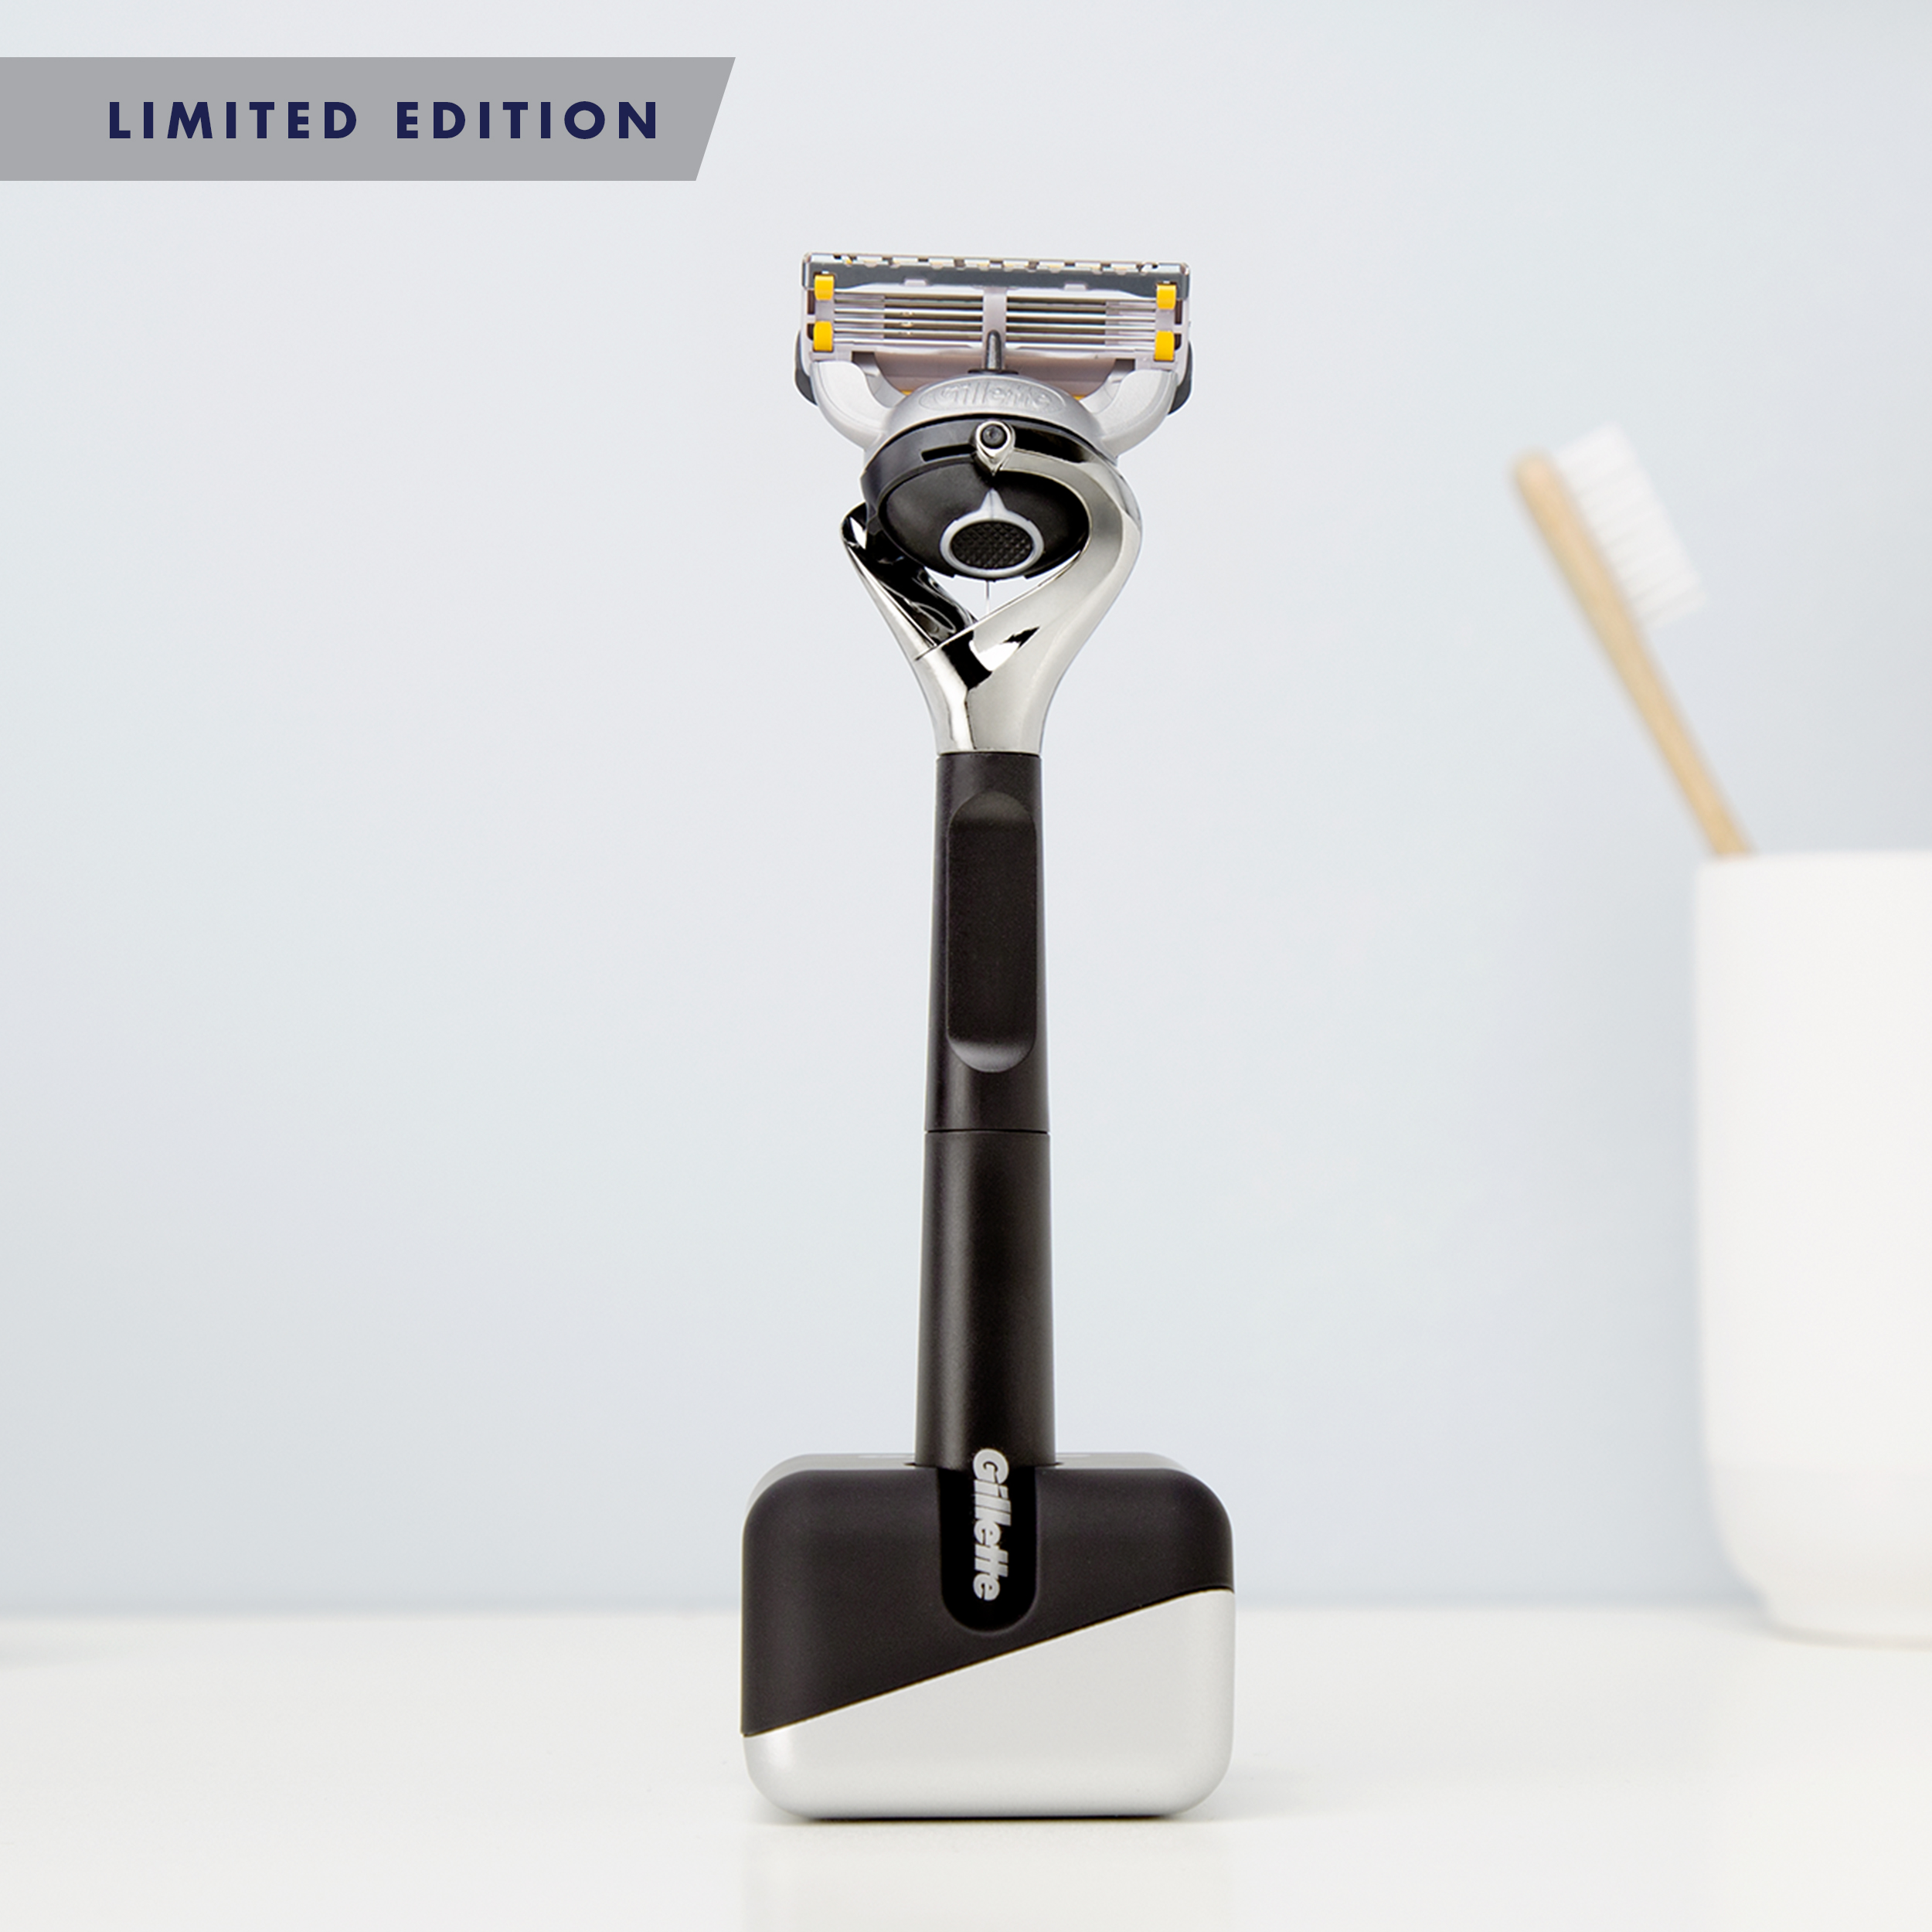 Gillette Limited Edition Fusion5 ProShield Razor Gift Pack - image 3 of 6